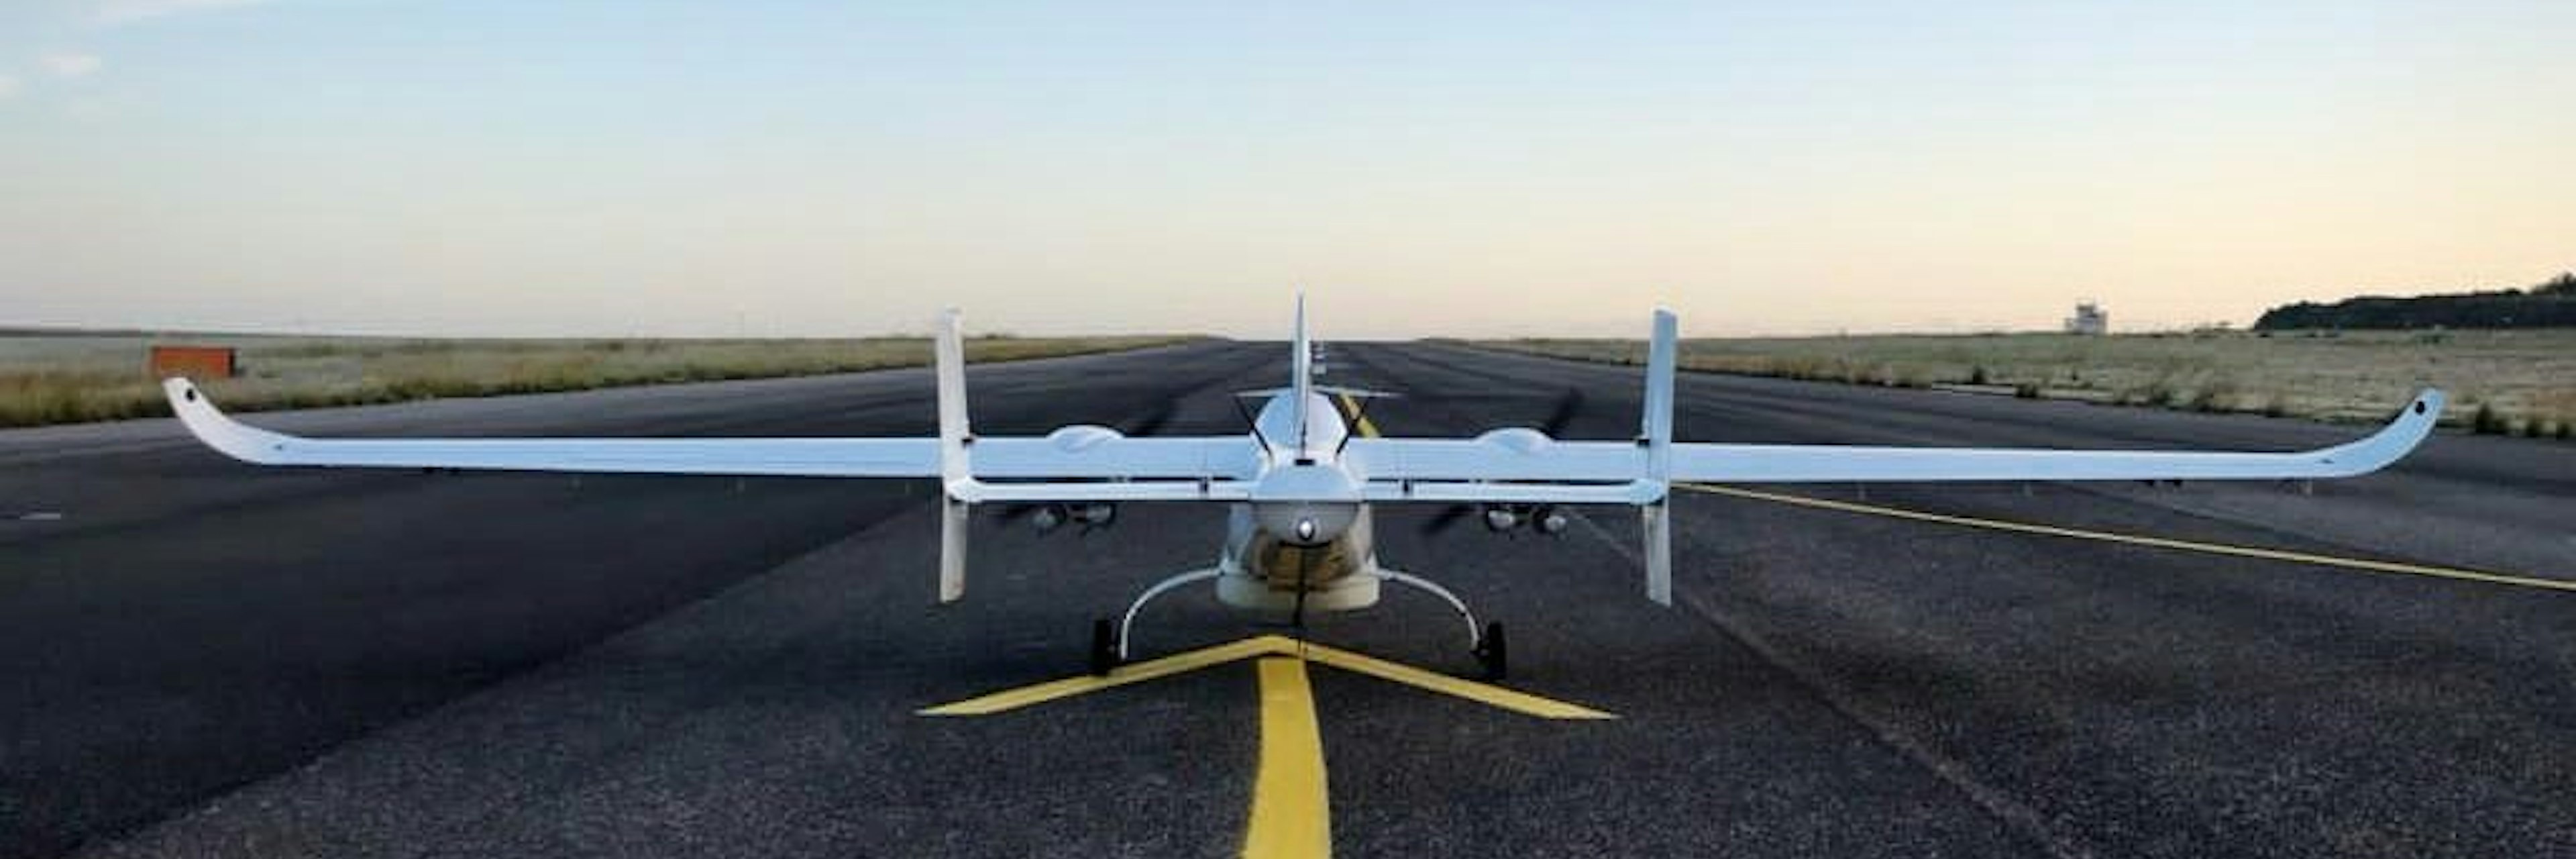 Picture of deeptech startup Tekever's drone used for defence purposes.